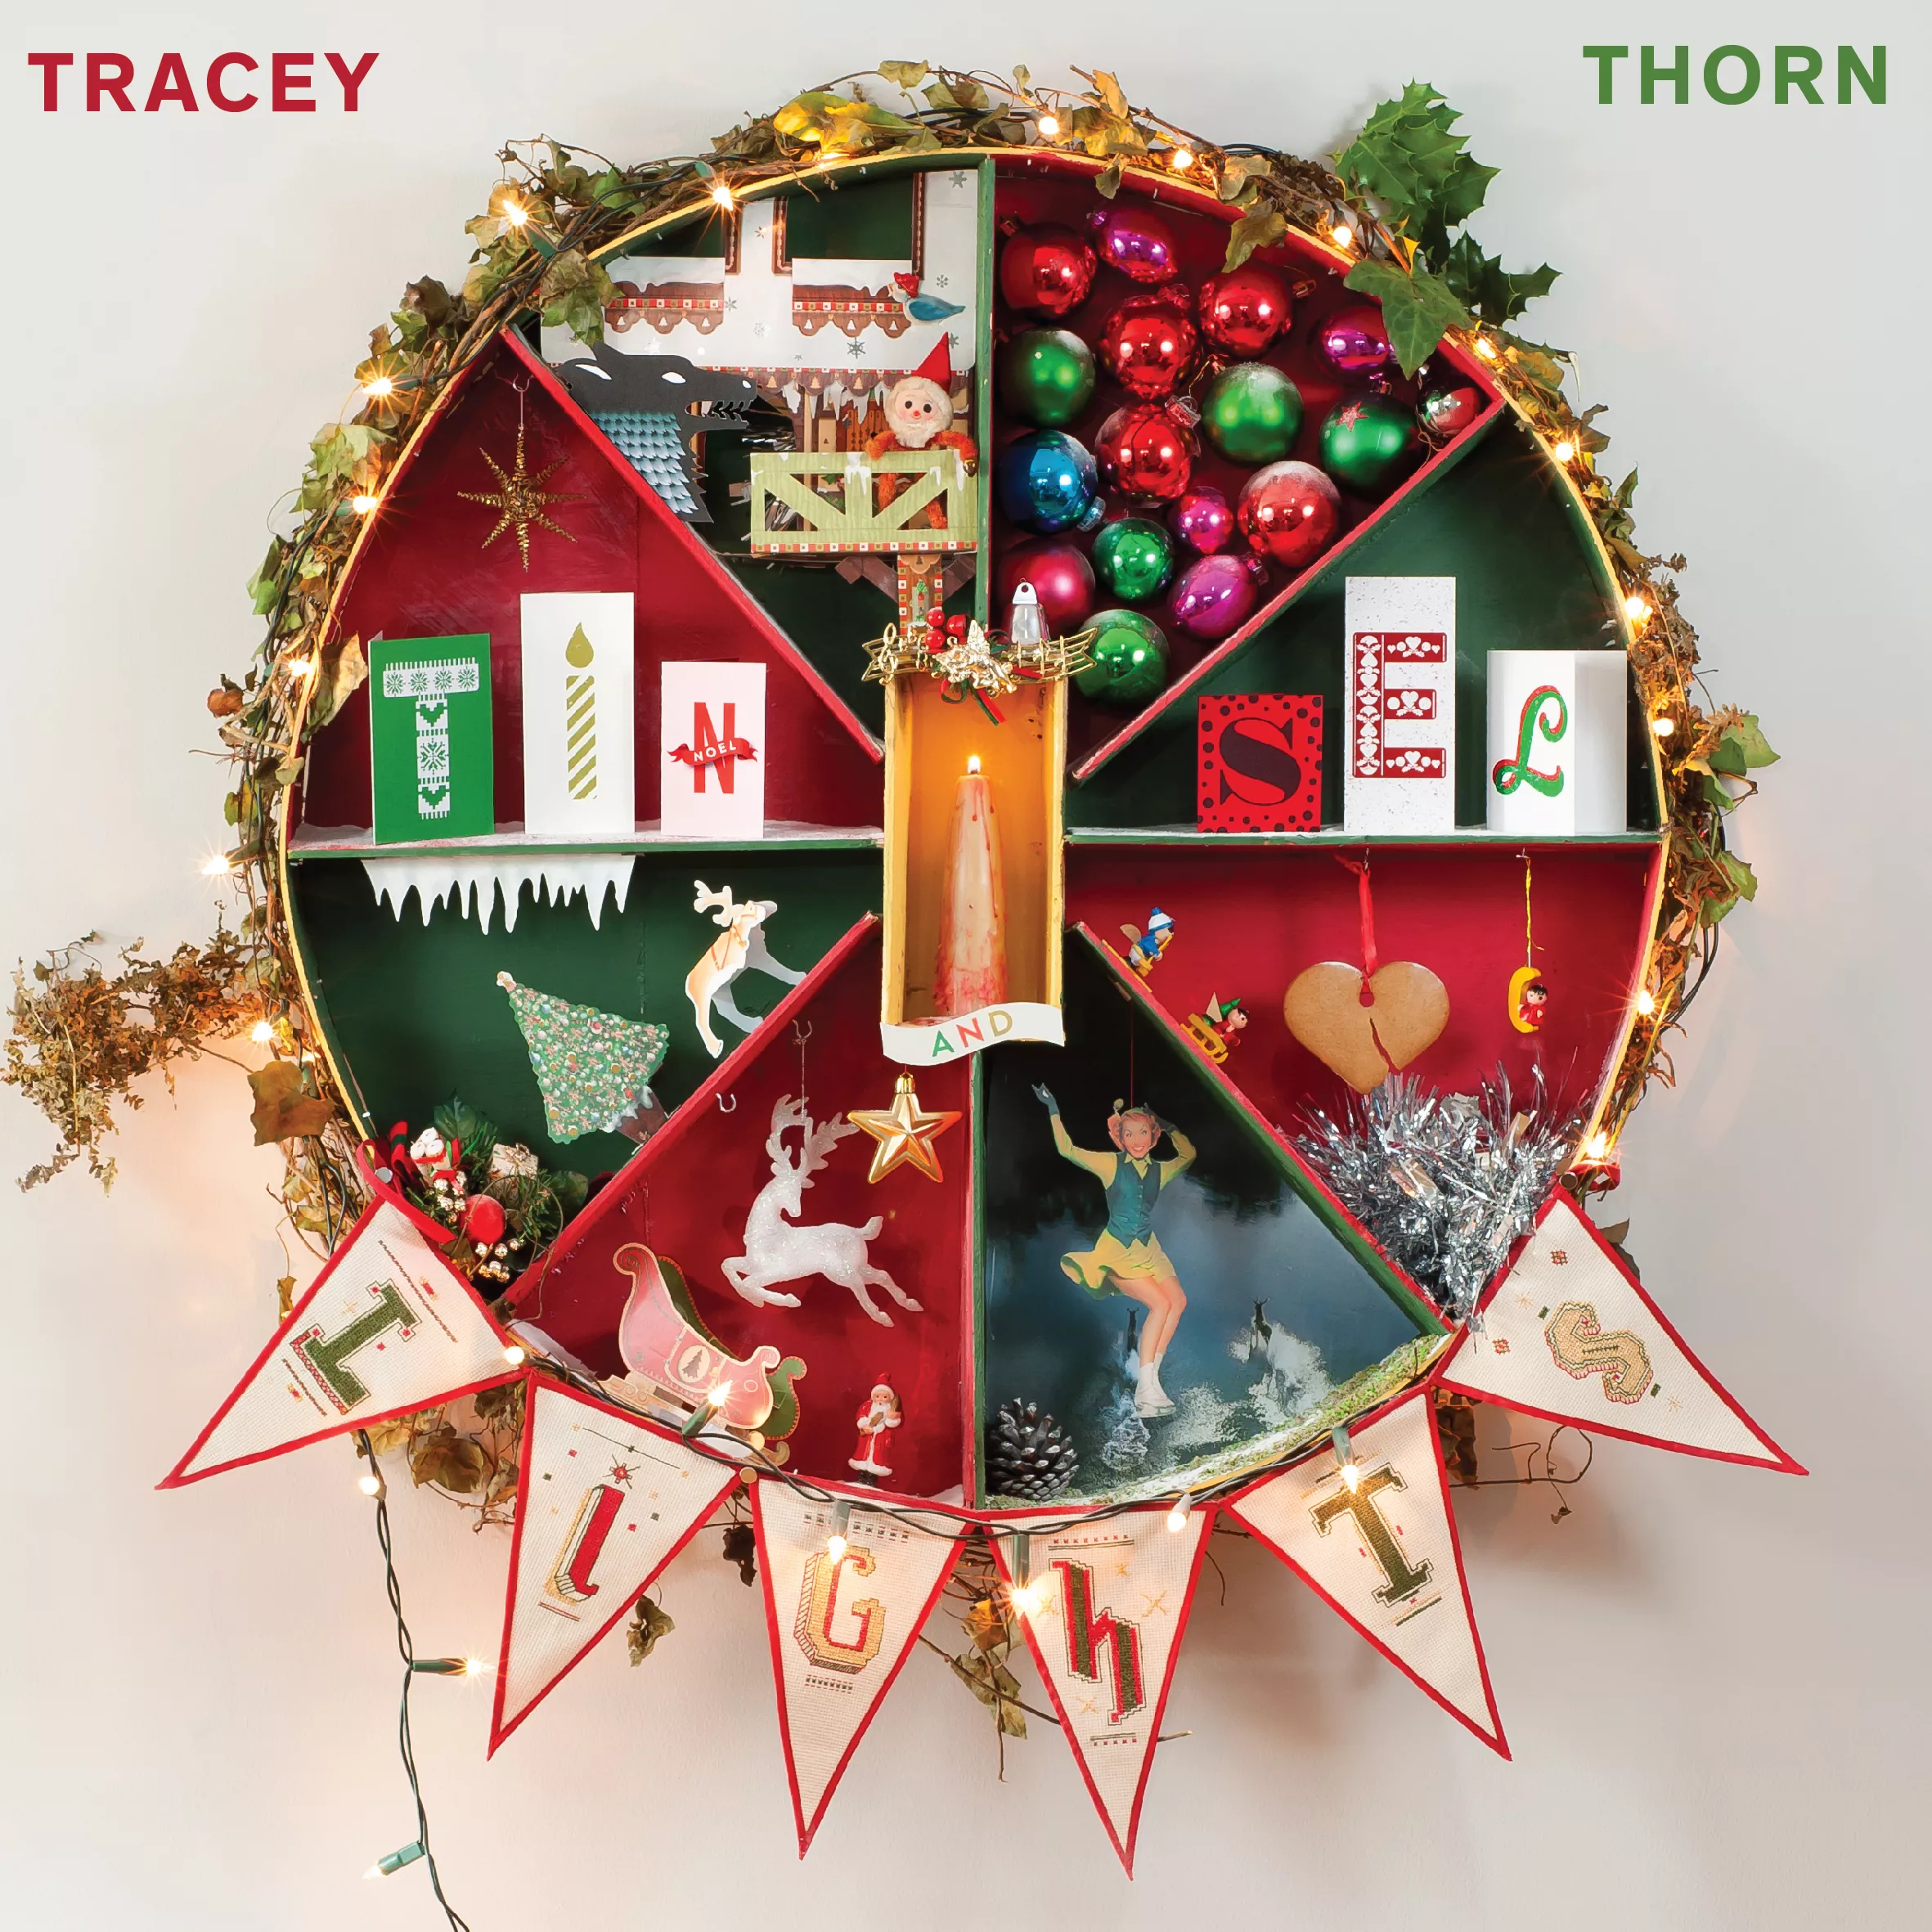 Tinsels And Lights - Tracey Thorn